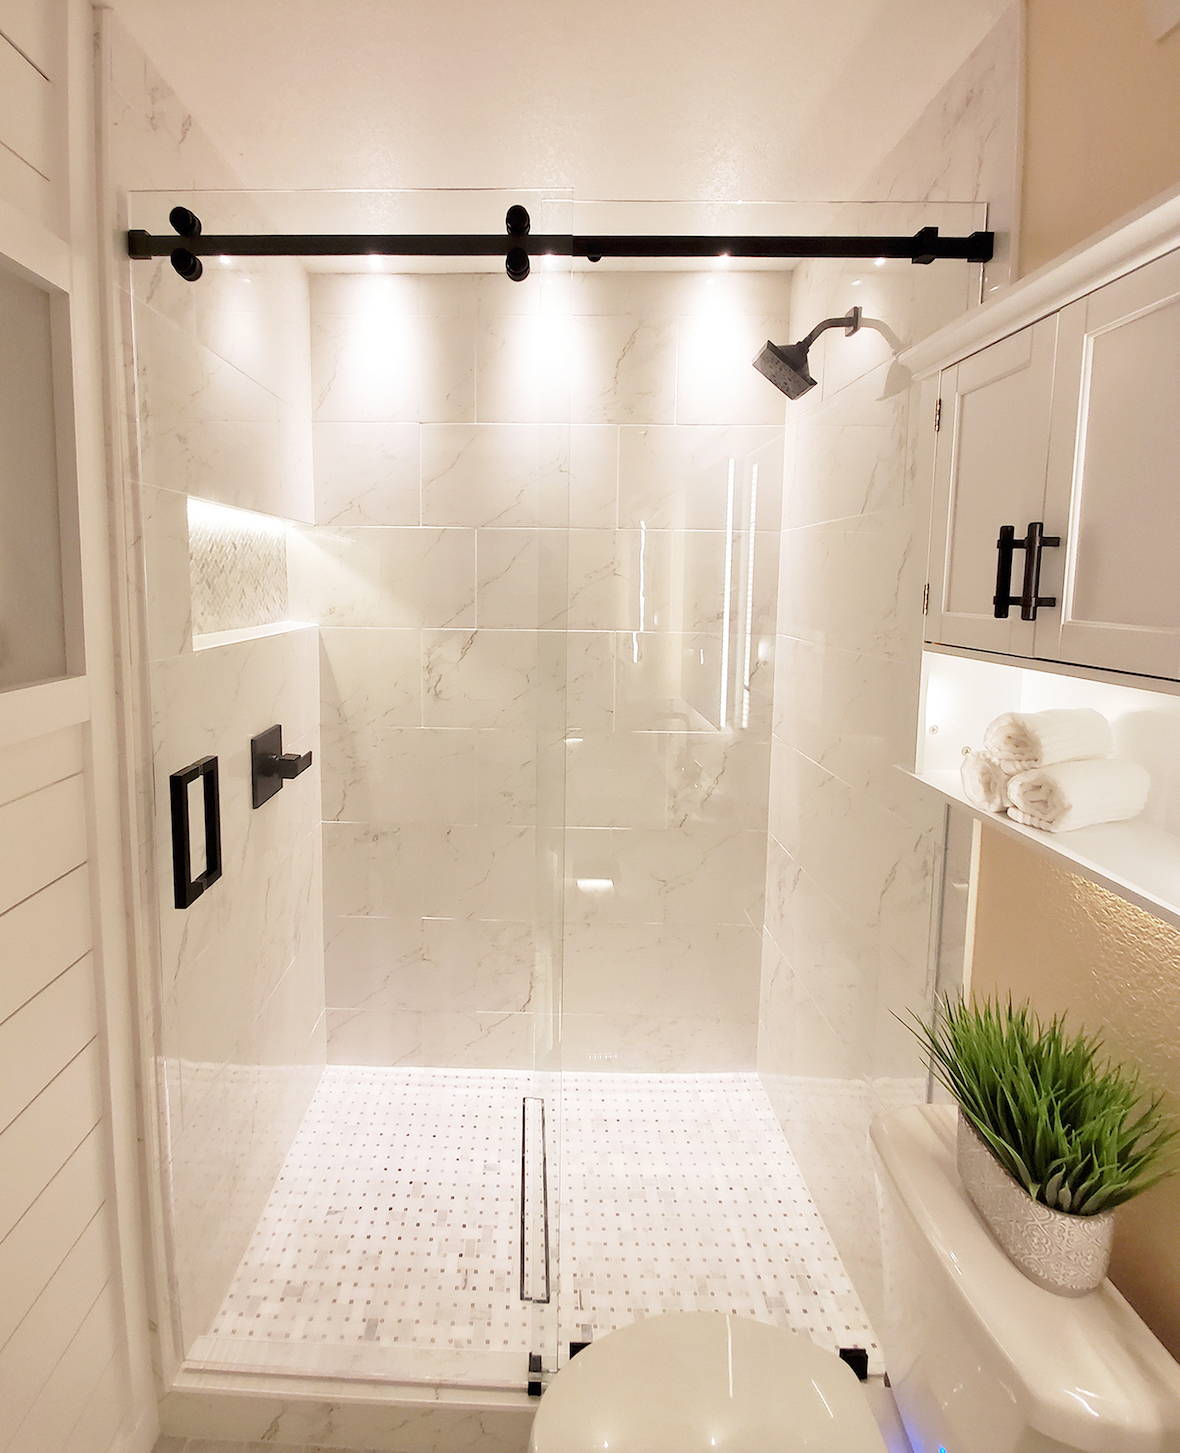 Beautiful bright bathroom lighting design in shower niches and cupboards